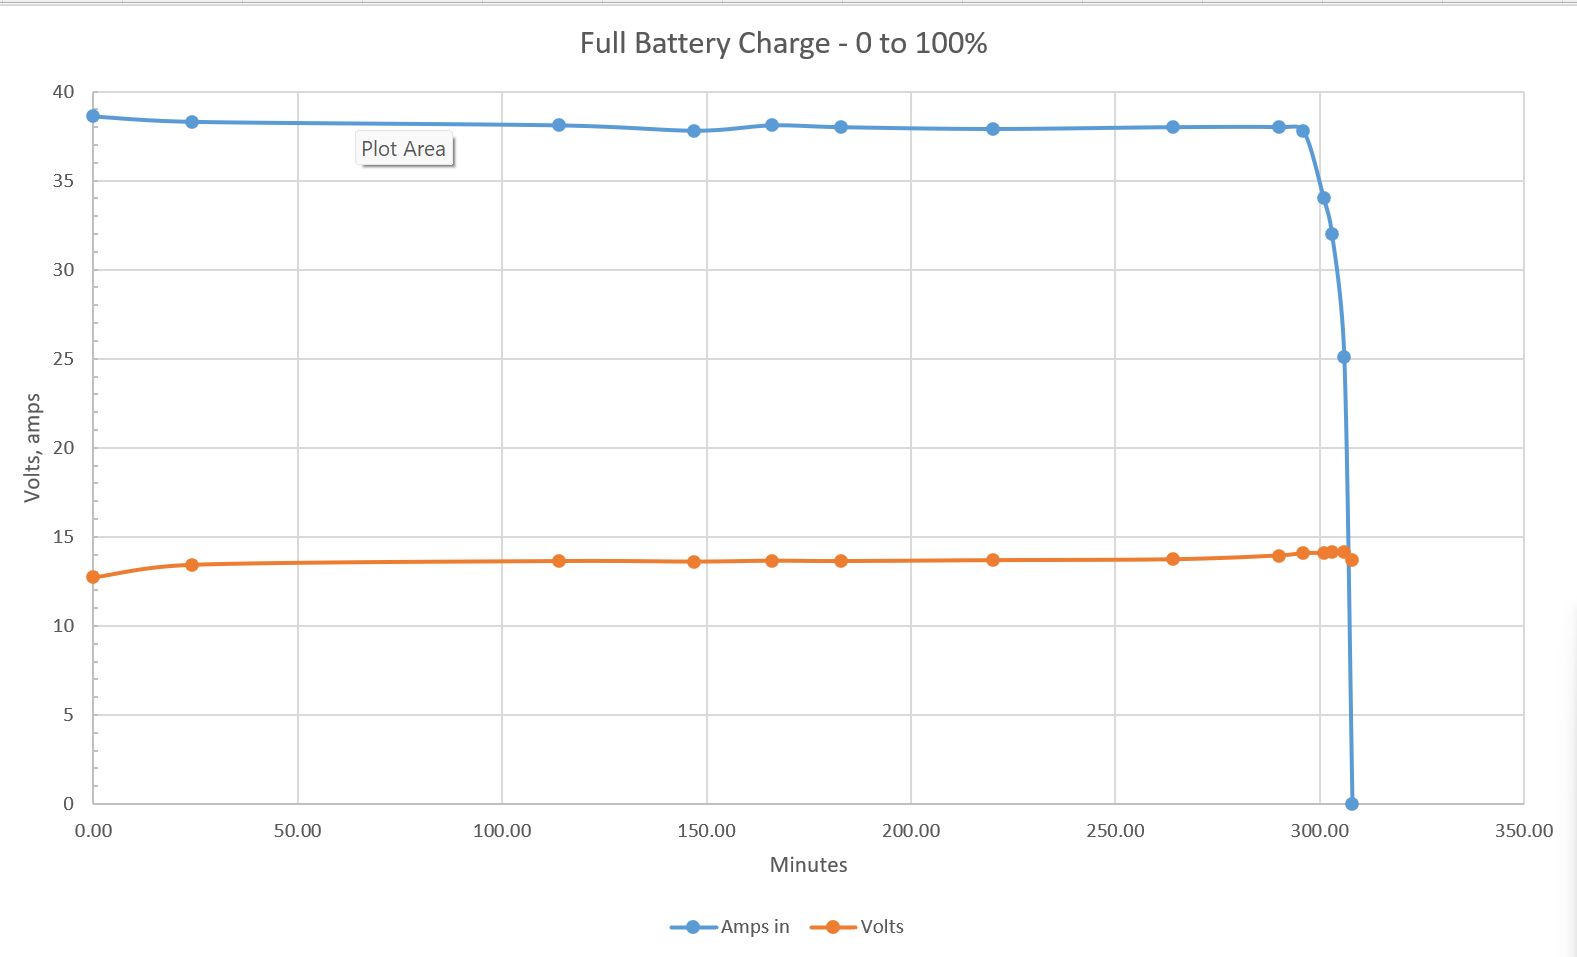 Discharge plot for the battery capacity test